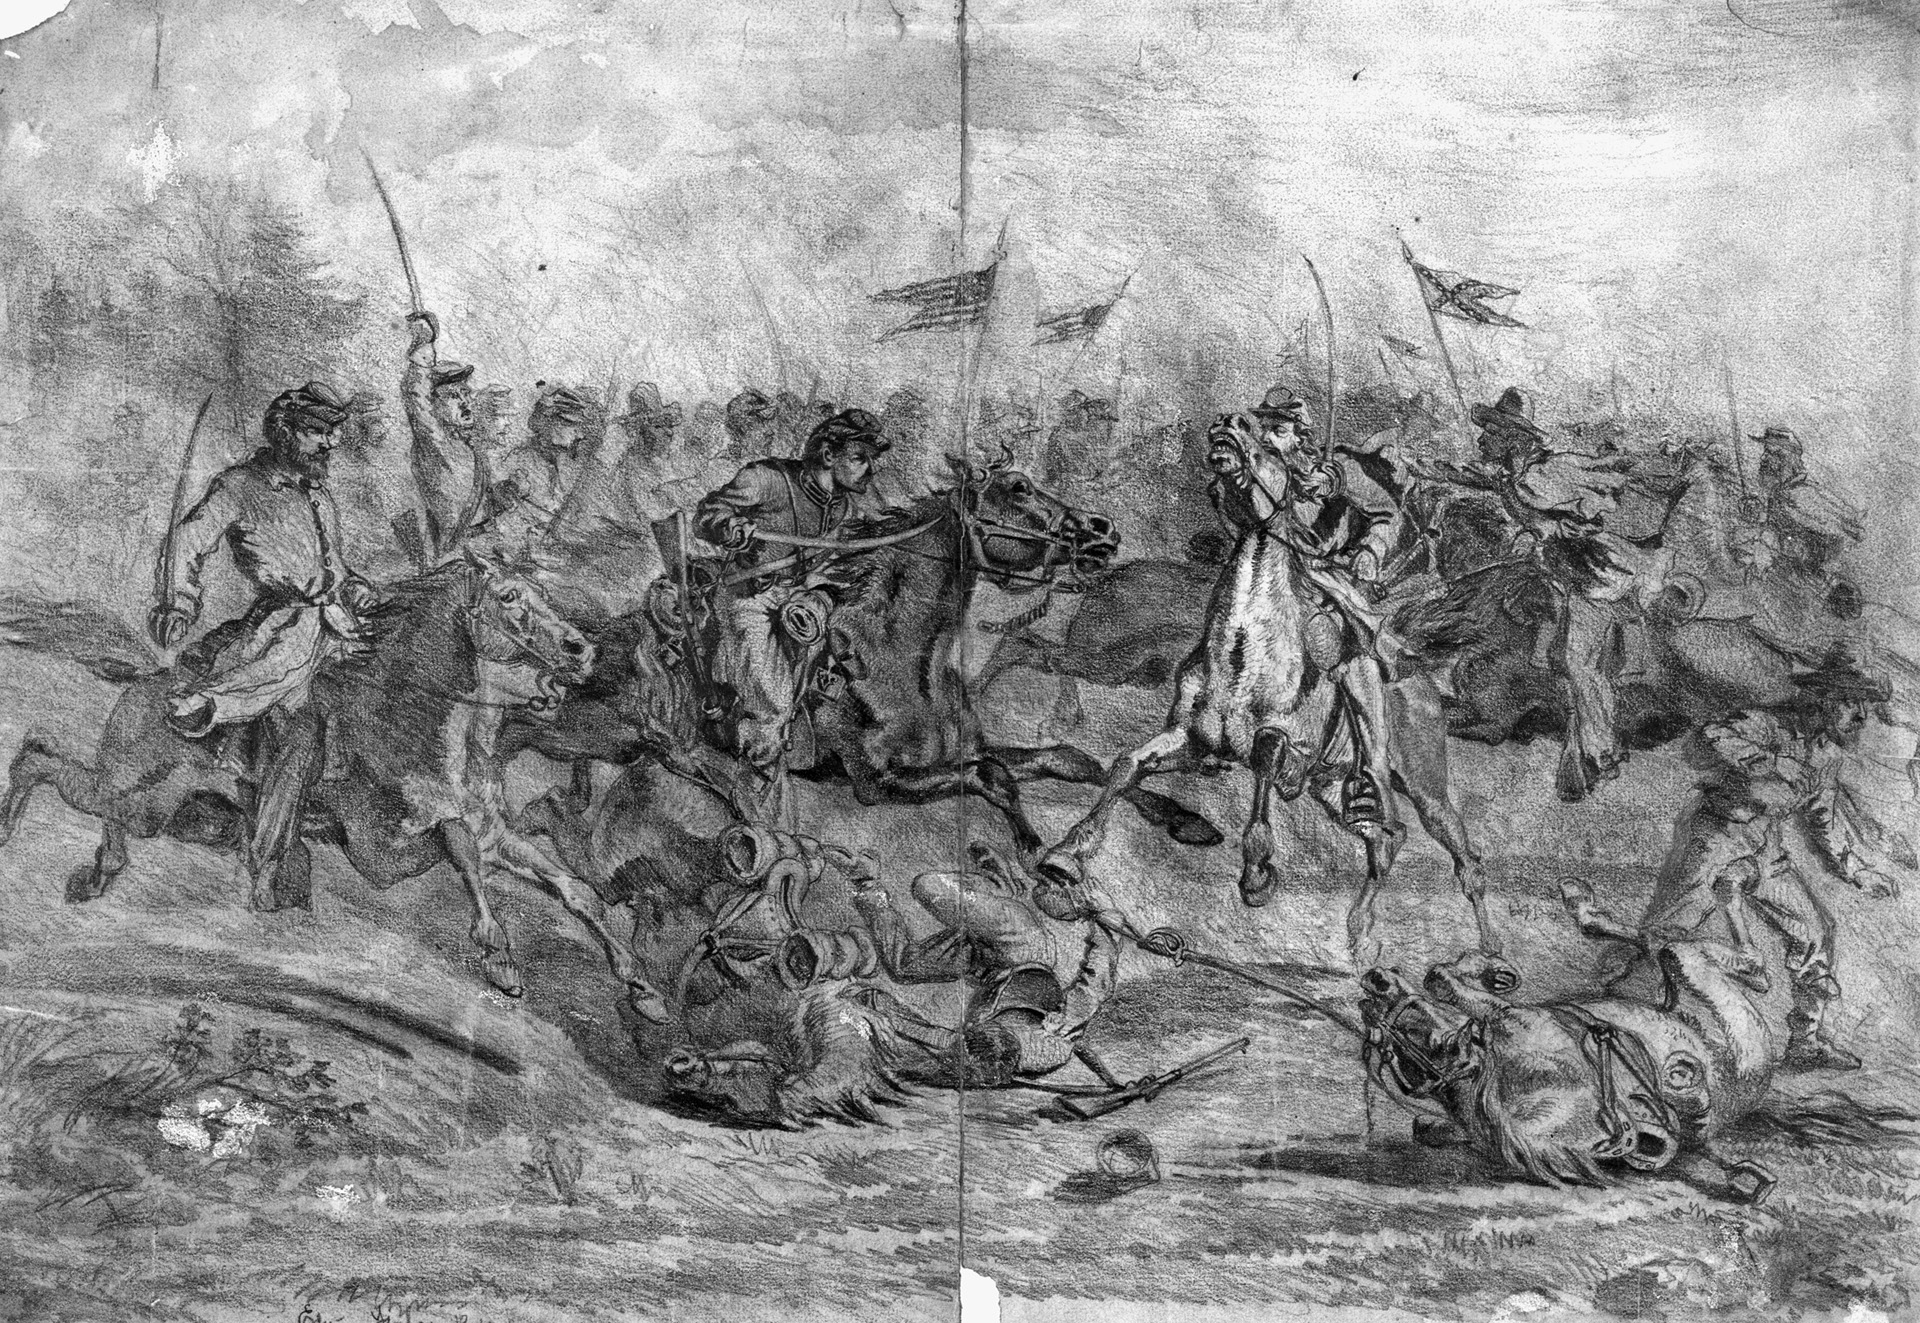 The 2nd U.S. Cavalry of the Reserve brigade of Brig. Gen. John Buford’s First Division, is shown in action near Beverly’s Ford in a period sketch by Edwin Forbes. Buford conducted a fighting withdrawal as he took his command back across the ford at the end of the day-long battle.